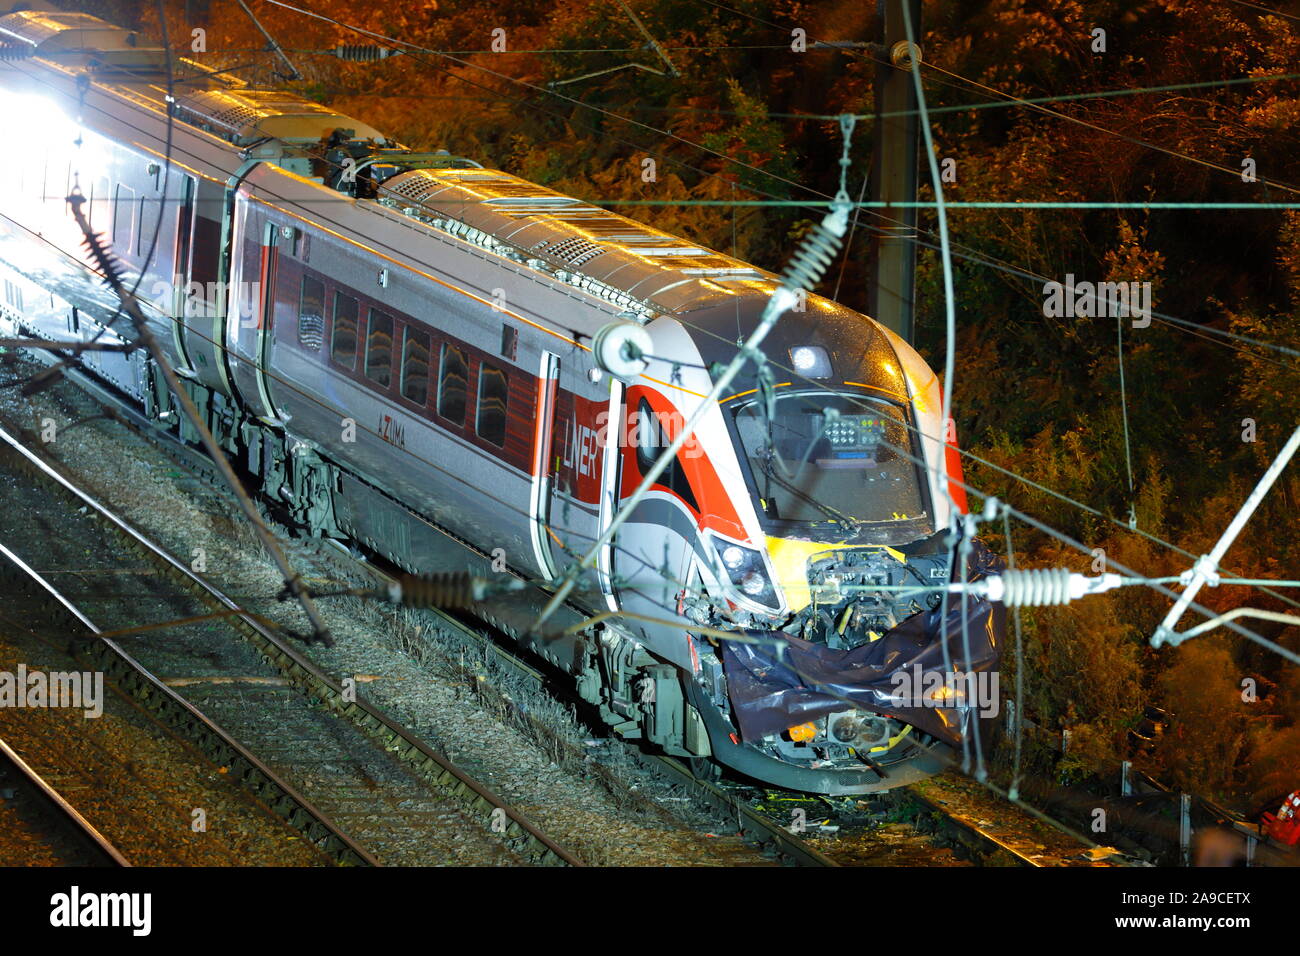 A damaged Azuma train that derailed in Leeds on 13th November 2019, after colliding with another train at the Neville Hill Depot. Stock Photo